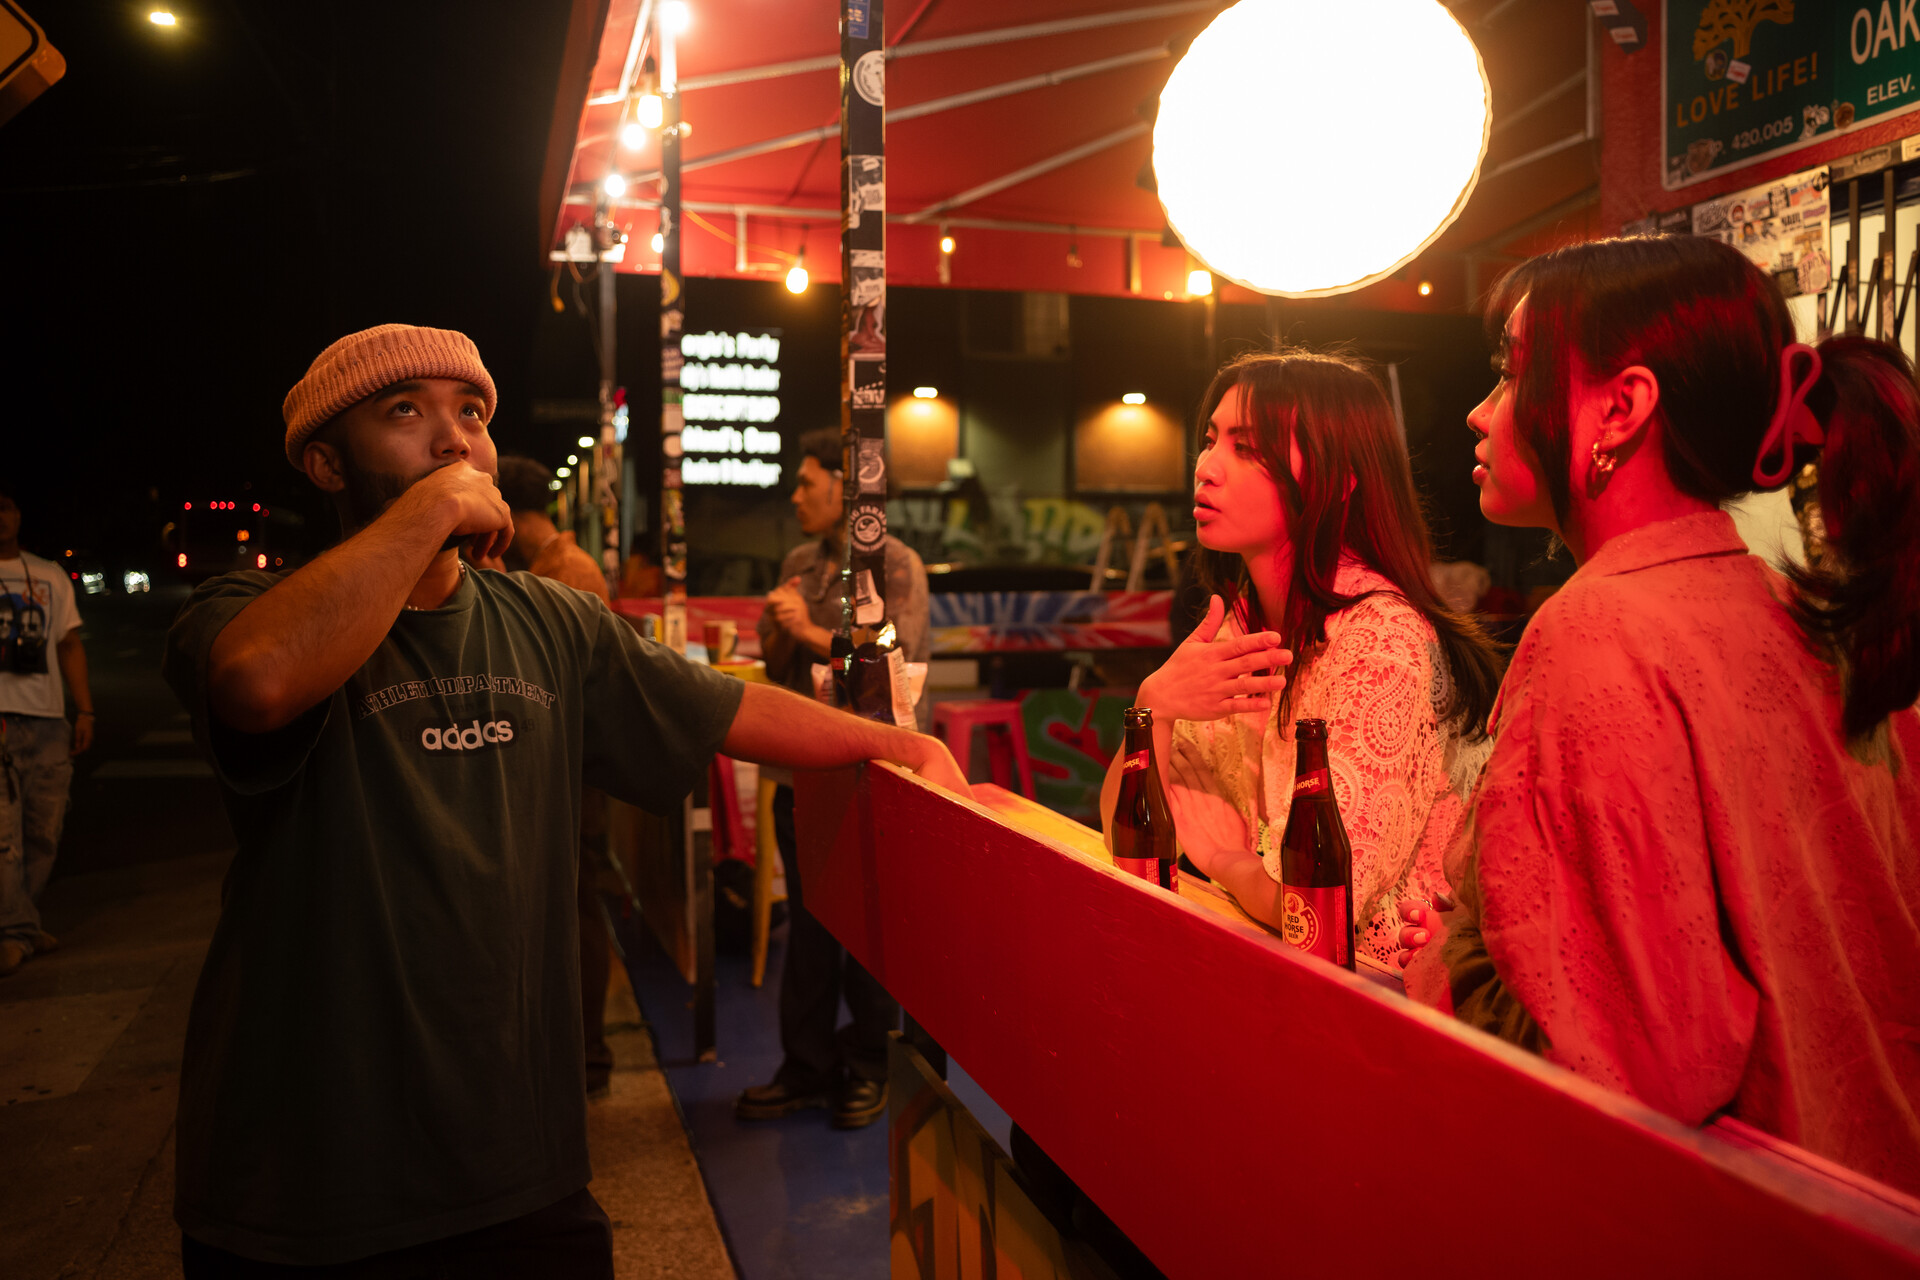 A videographer speaks to models between shots at a dimly lit Filipino restaurant.